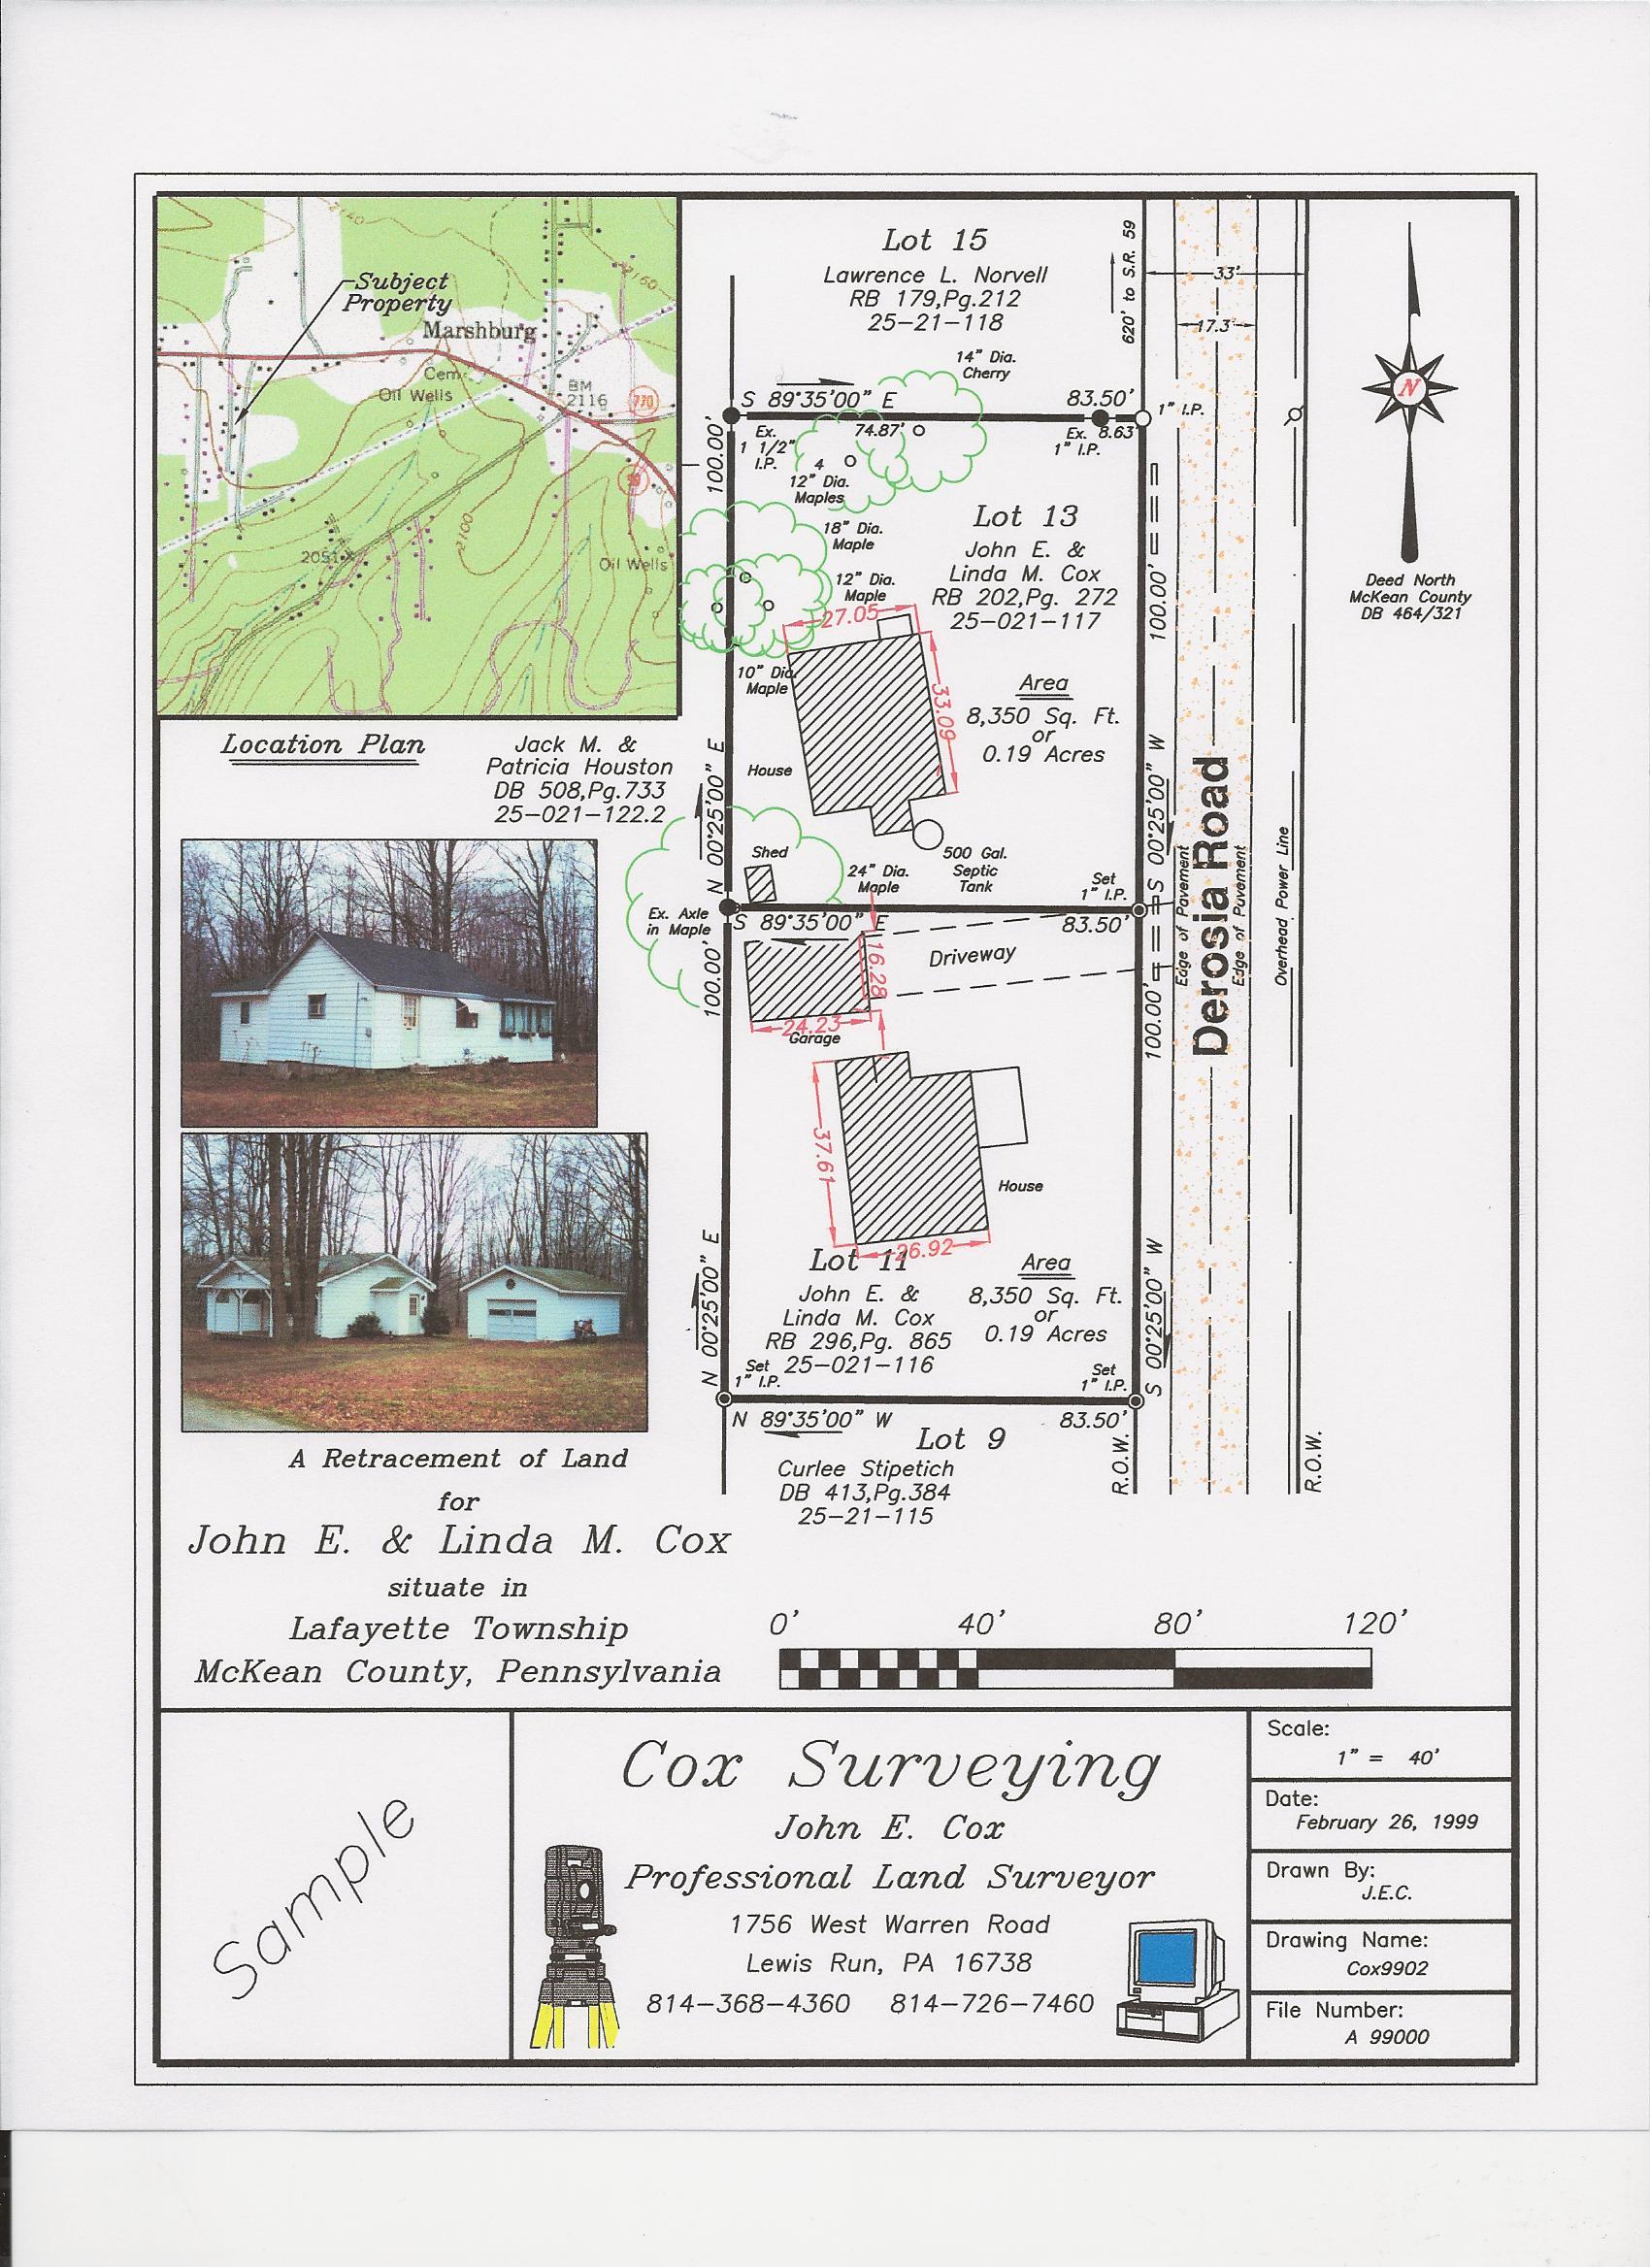 Final Map - Cox Surveying in Lewis Run, PA.